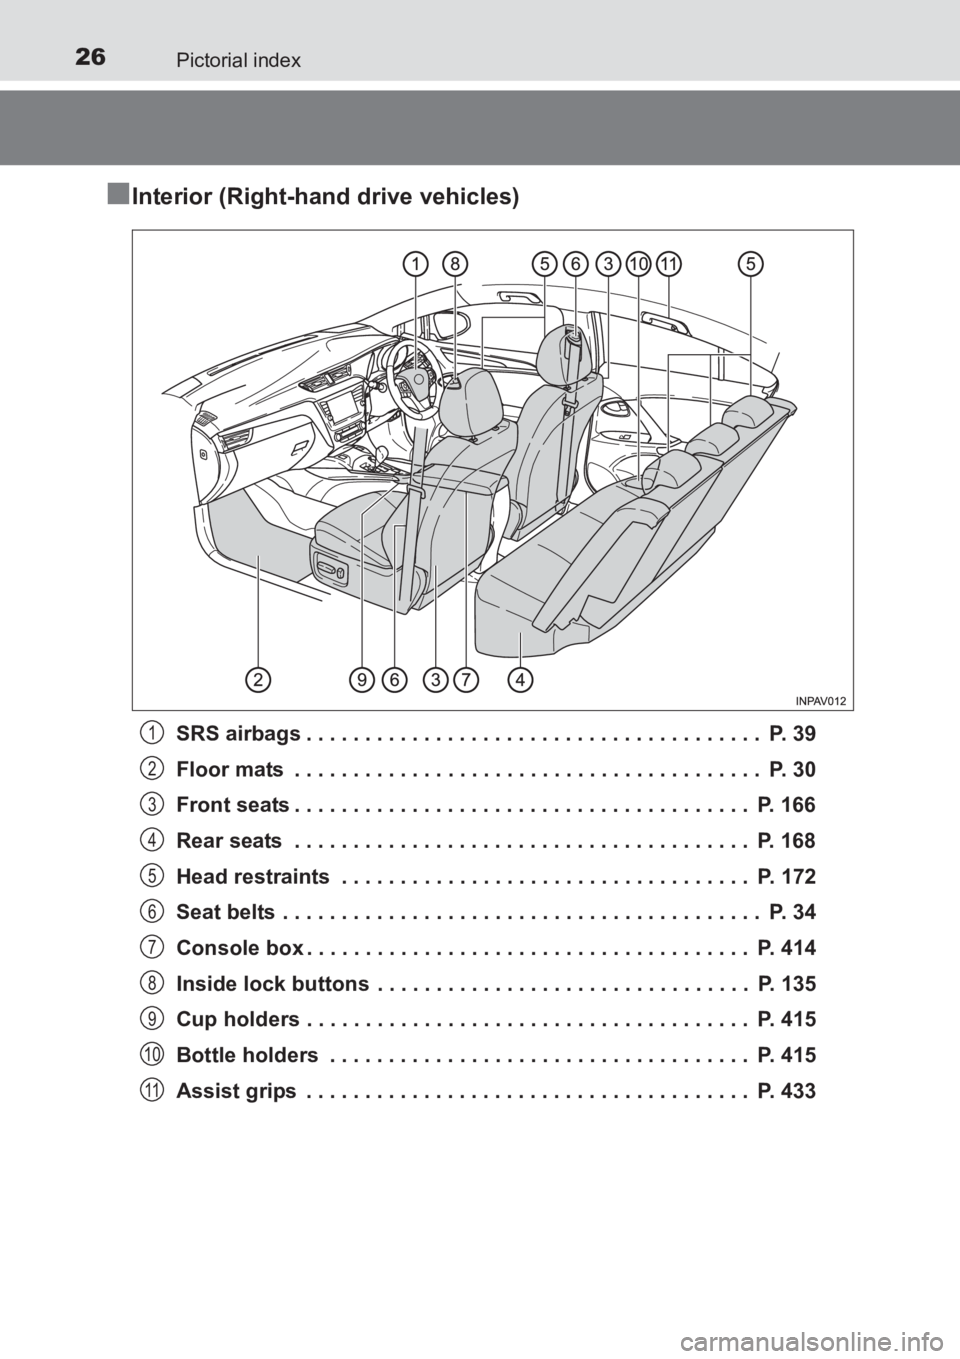 TOYOTA AVENSIS 2017  Owners Manual (in English) 26Pictorial index
AVENSIS_OM_OM20C66E_(EE)
■Interior (Right-hand drive vehicles)
SRS airbags . . . . . . . . . . . . . . . . . . . . . . . . . . . . . . . . . . . . . . .  P. 39
Floor mats  . . . . 